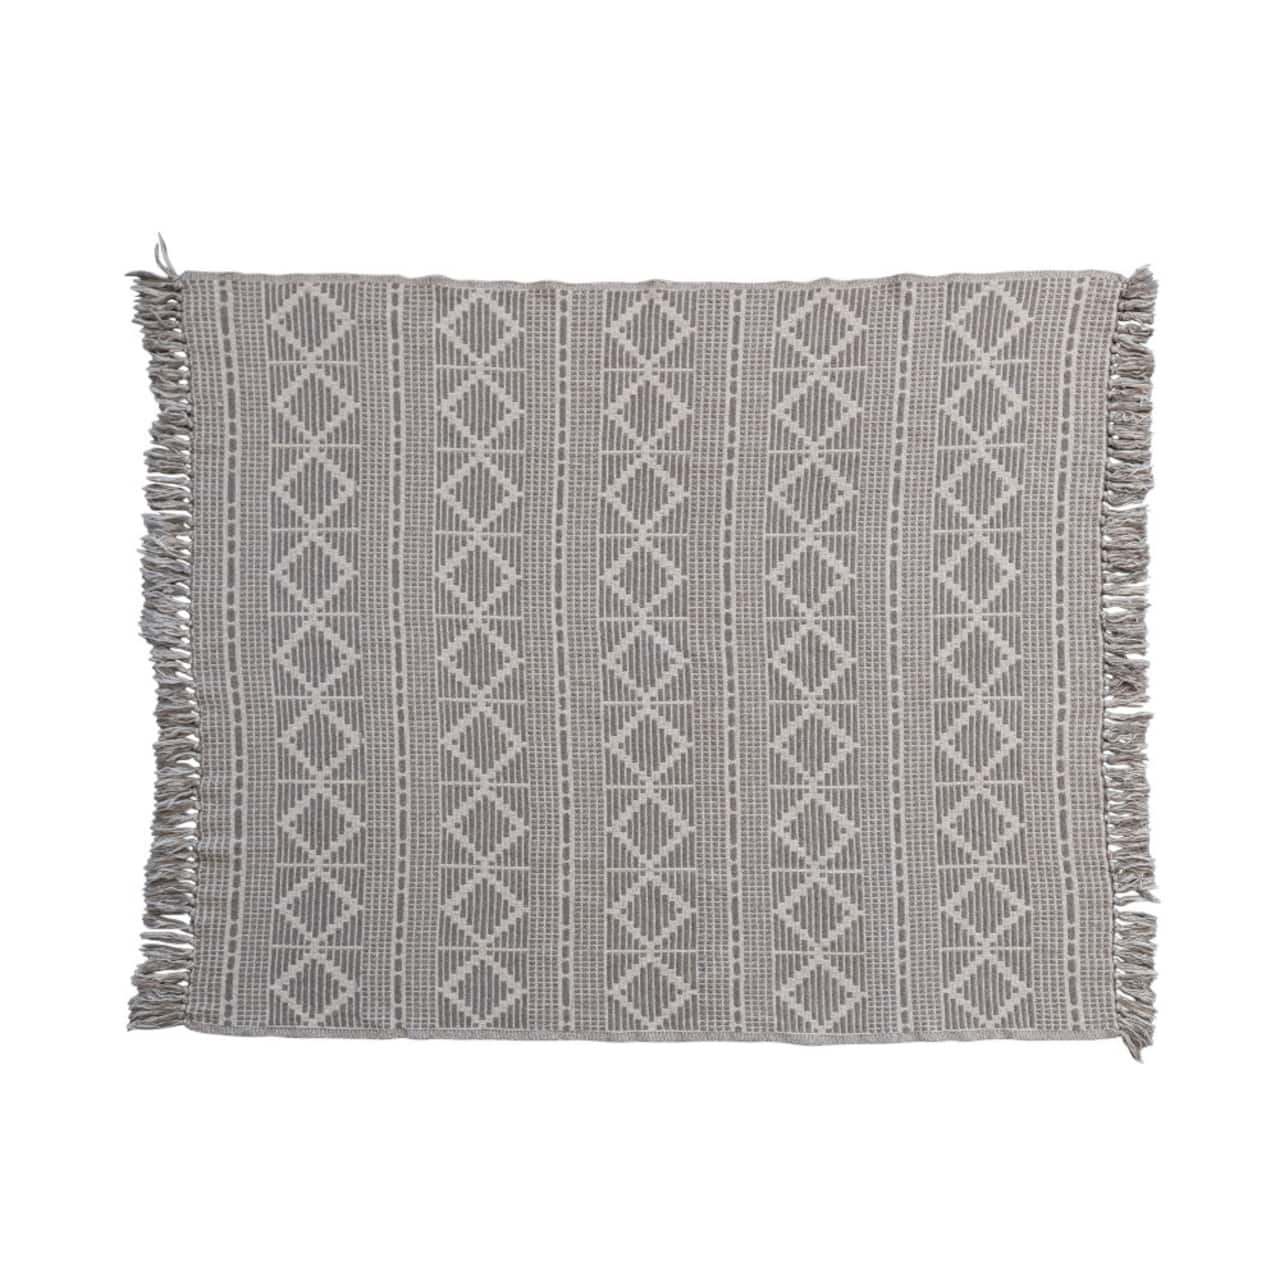 Bloomingville Gray Recycled Cotton Jacquard Throw Blanket with Fringe